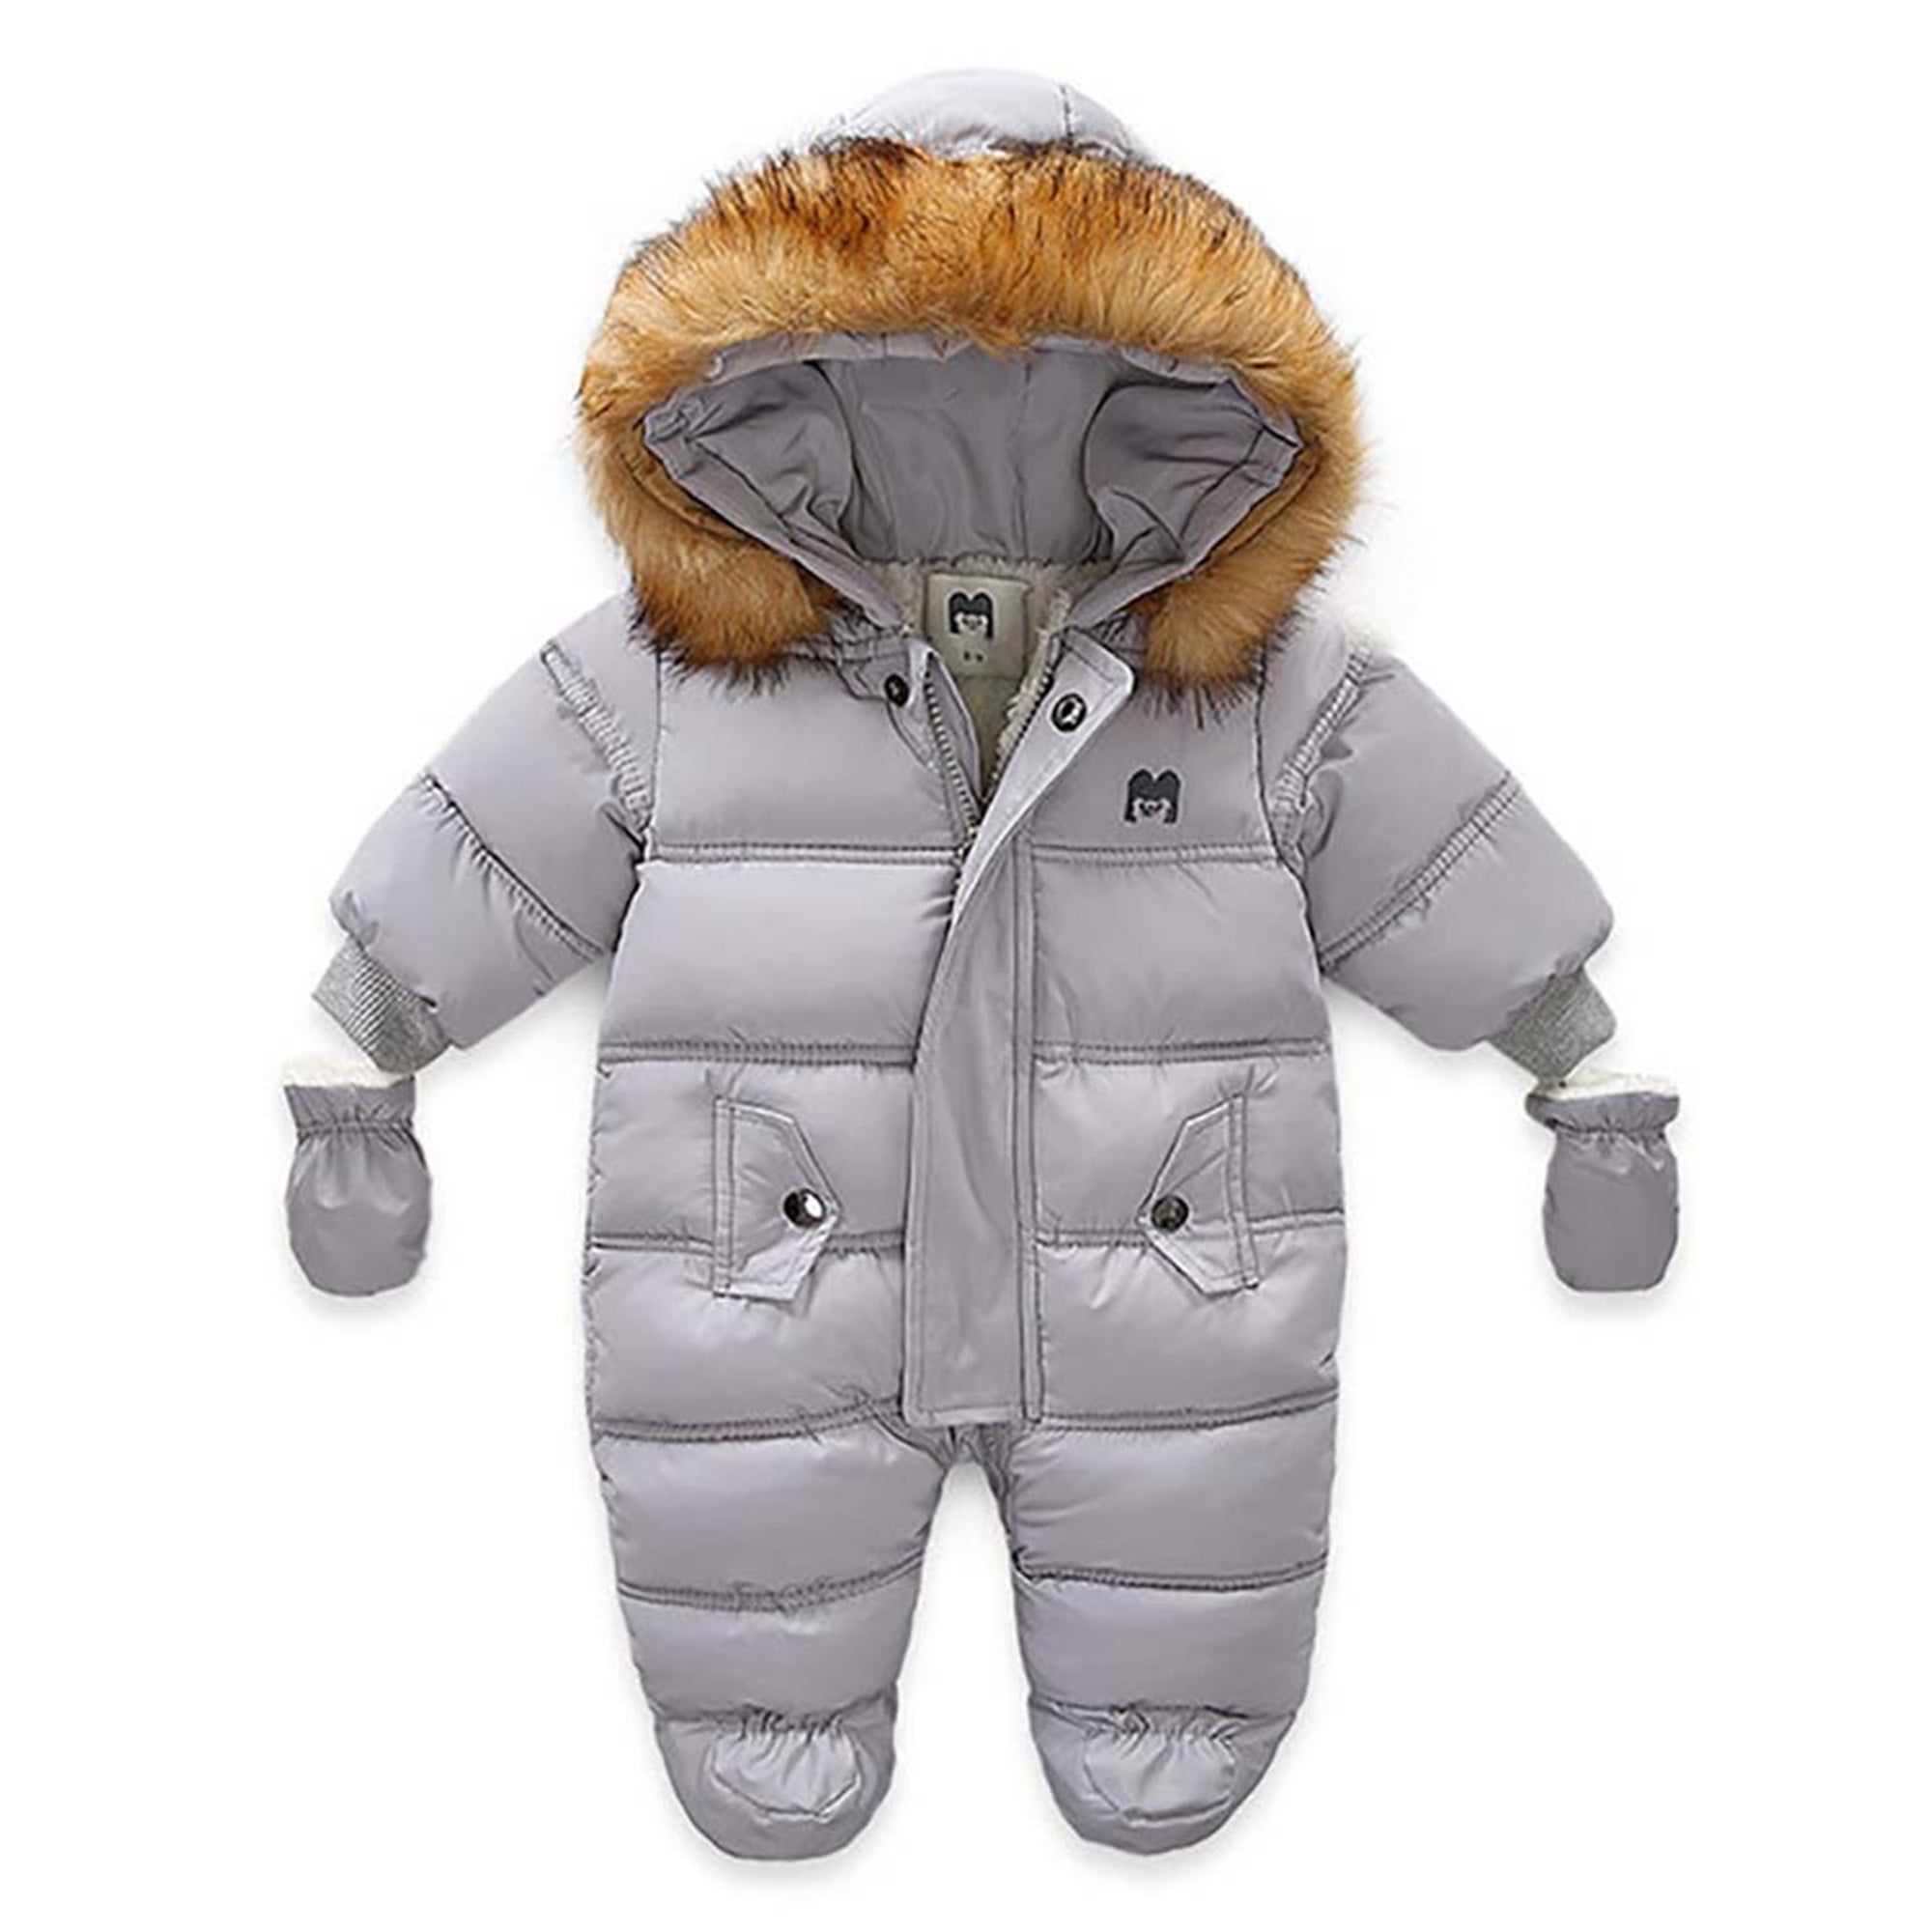 Color : Beige, Size : 6-9 Months Sylt 1927 Newborn Snowsuits Rompers Winter Jacket Winter Zipper Down Jumpsuits for Baby Boys Girls with Gloves-Casual Hoodied Footie Snowsuit Unisex Warm 